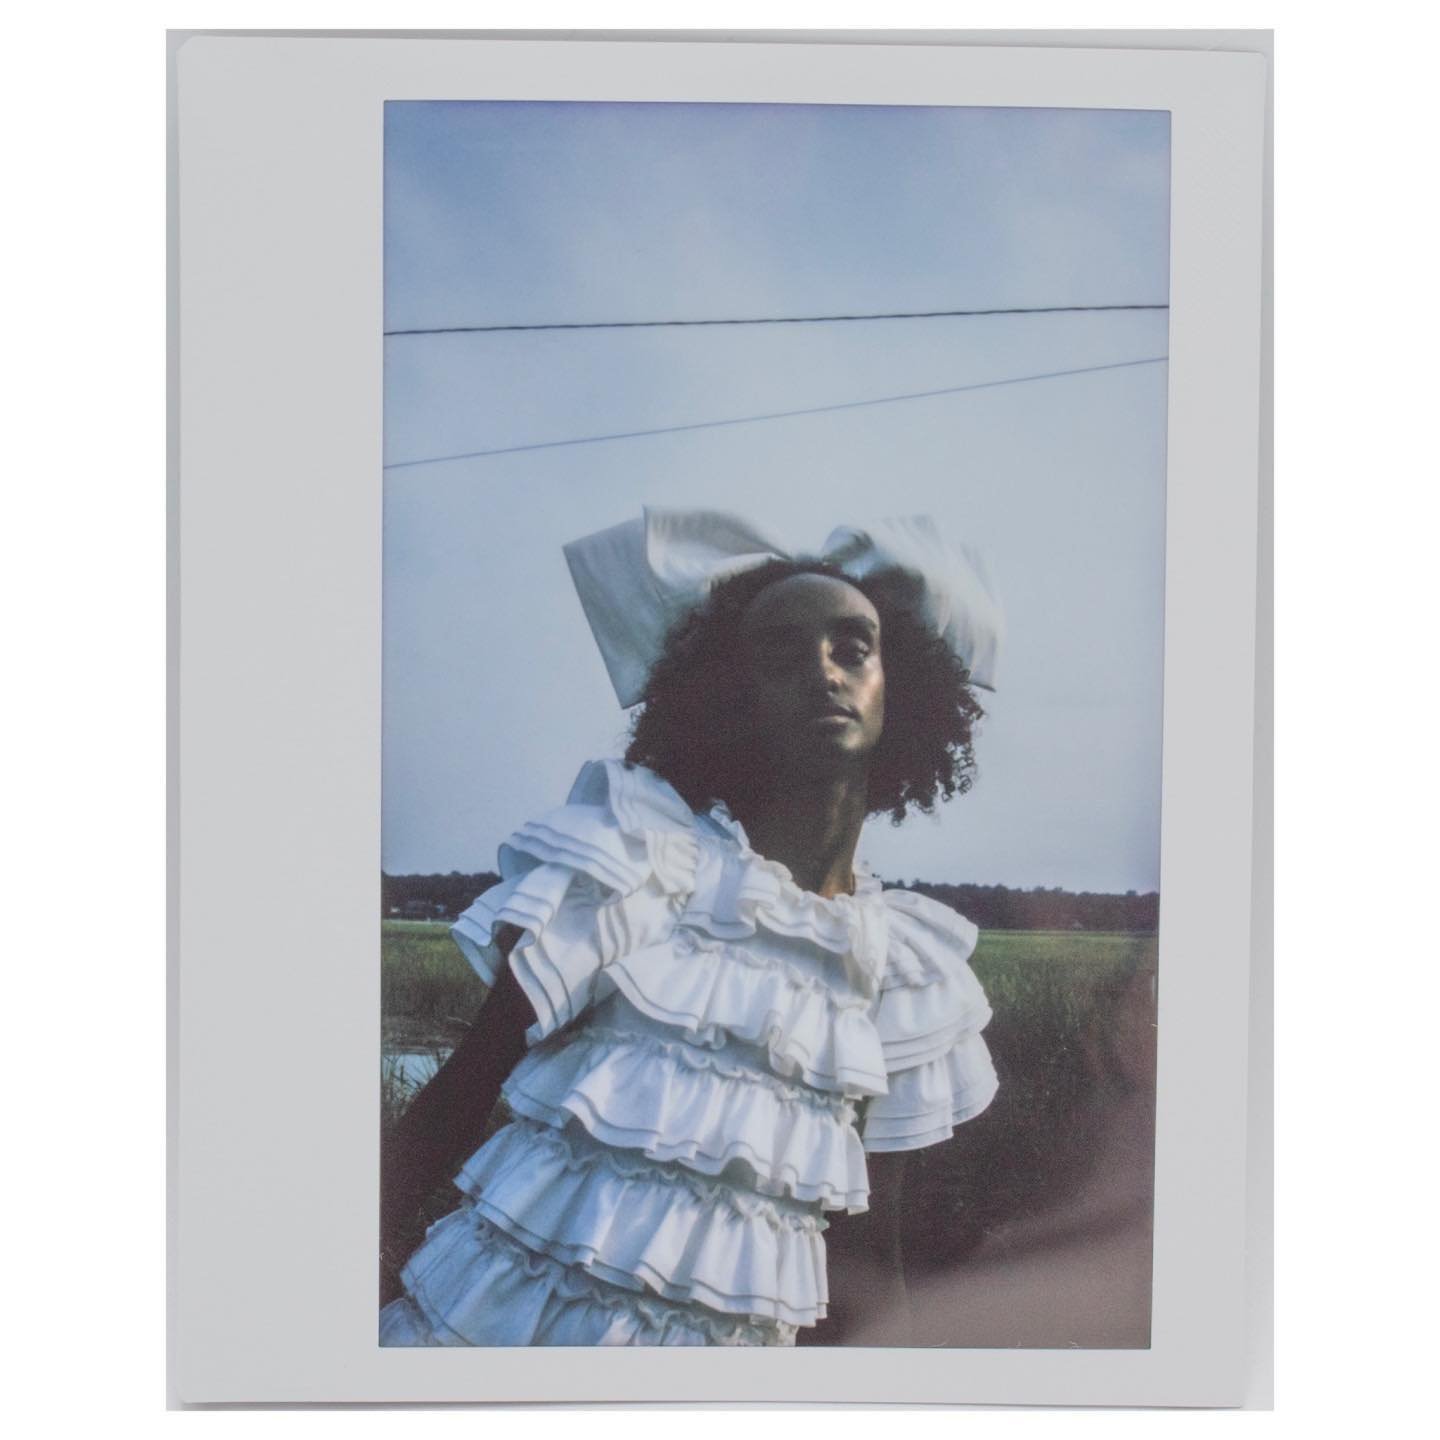 I lugged various Polaroid cameras around with me throughout my teens and 20s. It broke my heart when my fav Land Cam films were discontinued, and eventually Polaroid shuttered. These instant photos I took from this season&rsquo;s shoot tap into an ol